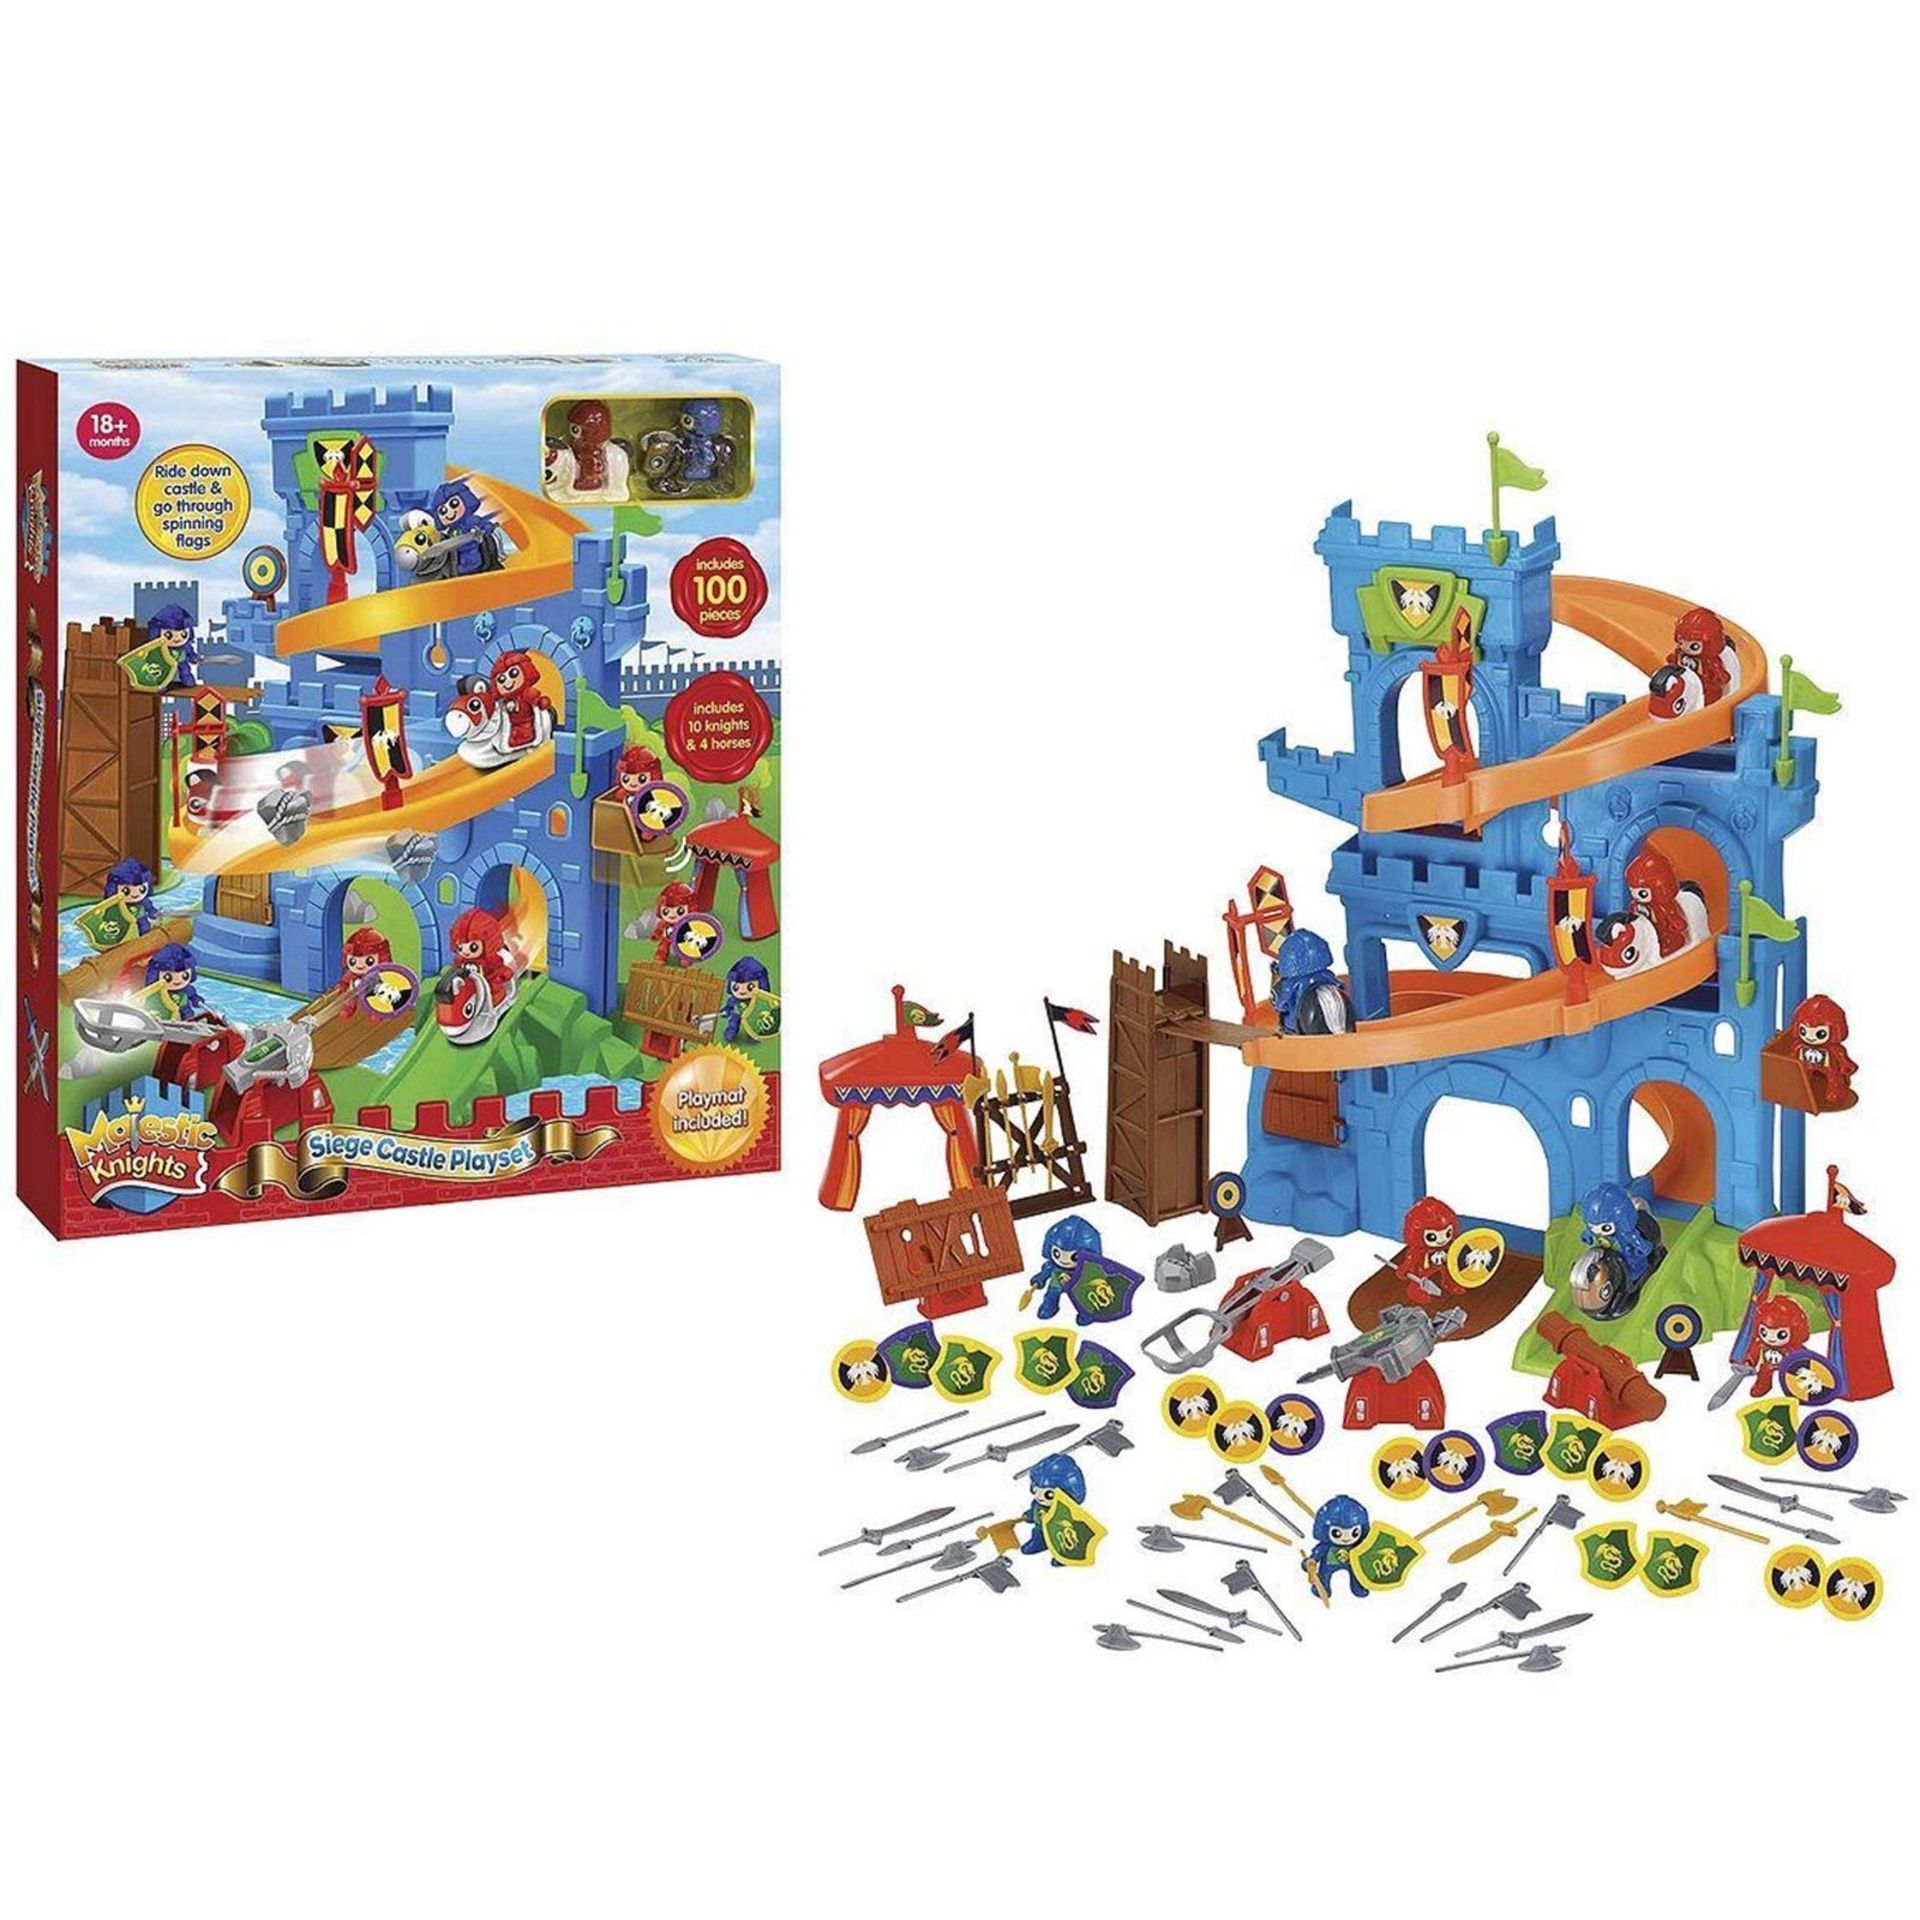 V Brand New Majestic Knights 100 Piece Siege Castle Playset - Includes 10 Knights And Four Horses